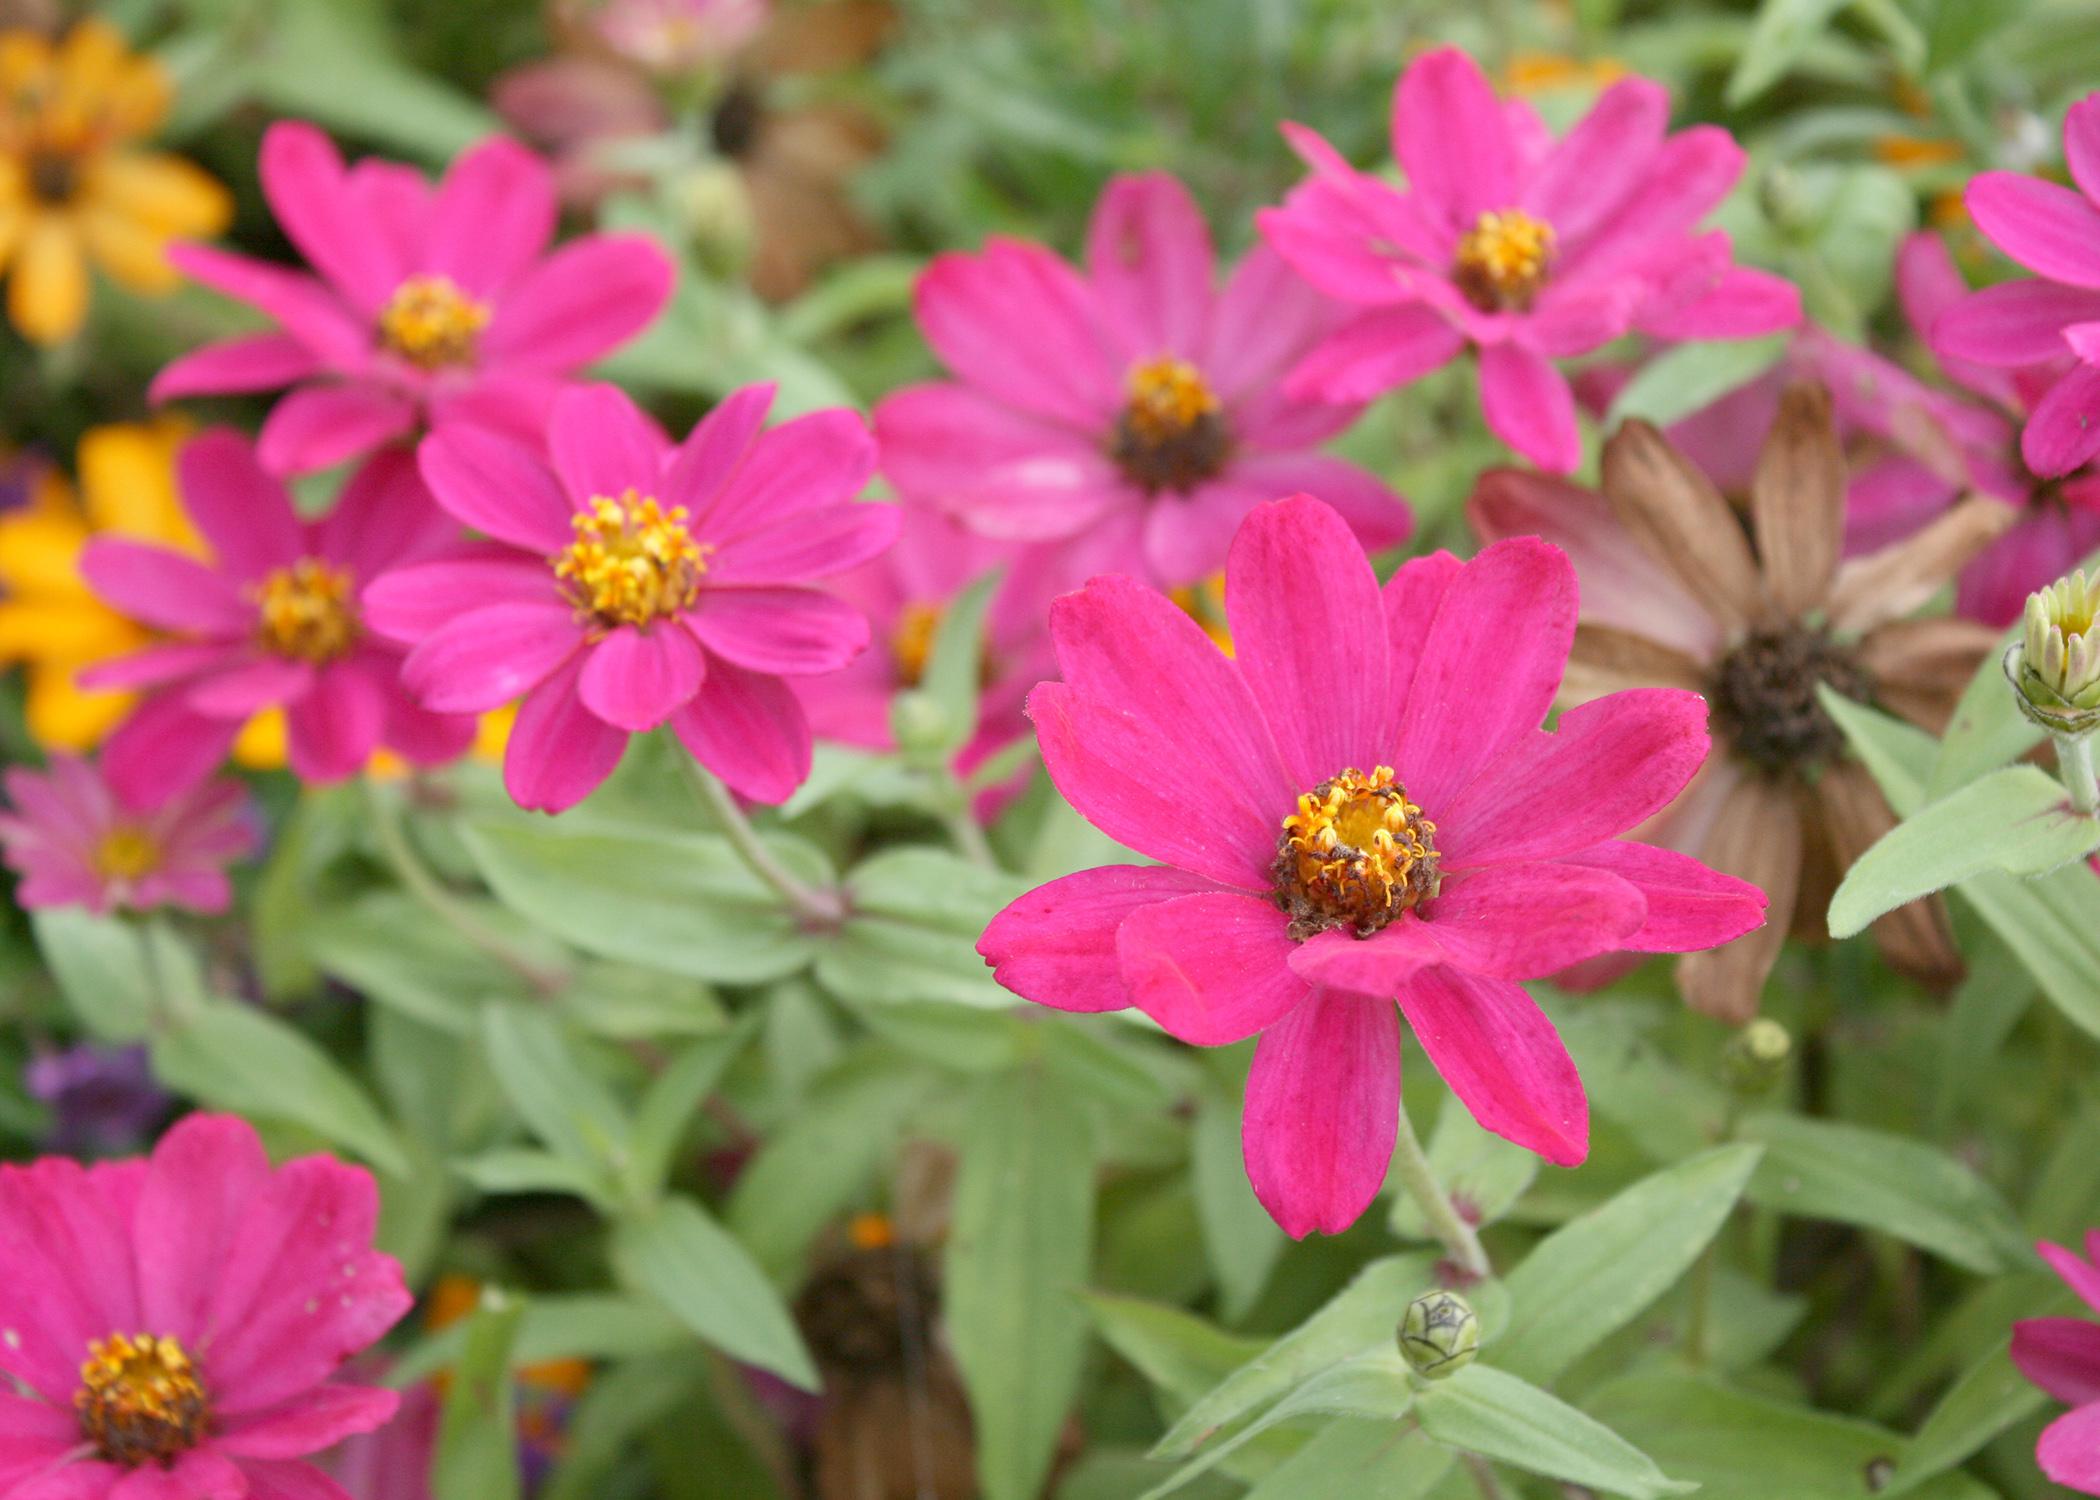 Zahara Cherry is a beautiful summer-blooming zinnia that gets a second wind in the fall and produces a new round of colorful blooms when given the chance. (Photo by MSU Extension Service/Gary Bachman)